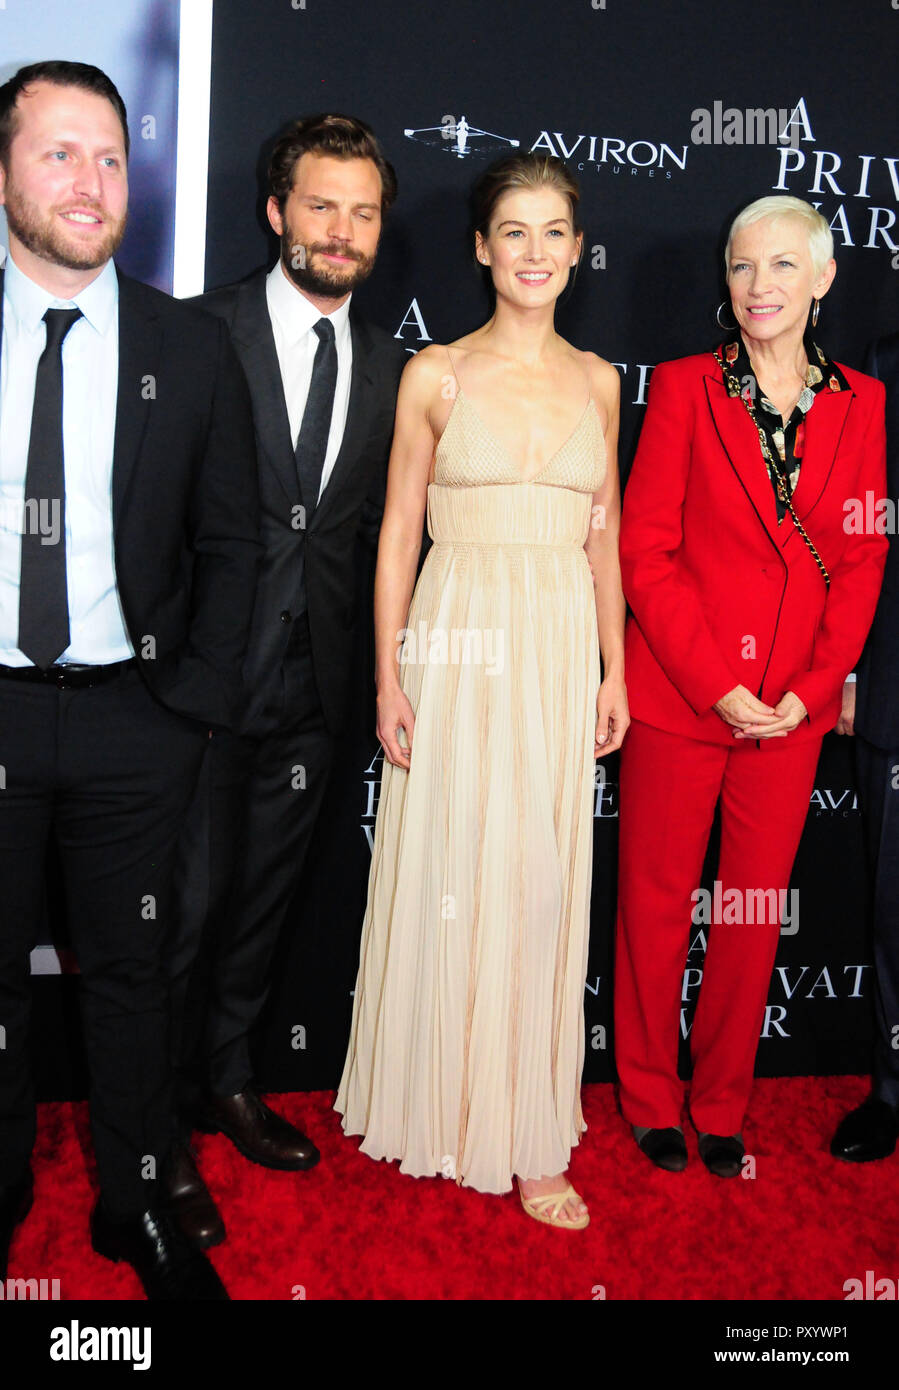 Beverly Hills, California, USA. 24th October, 2018. Director Matthew Heineman, actor Jamie Dornan, actress Rosamund Pike and singer Annie Lennox attend the Los Angeles Premiere of Aviron Pictures' 'A Private War' at Samuel Goldwyn Theater in Beverly Hills, California. Photo by Barry King/Alamy Live News Stock Photo